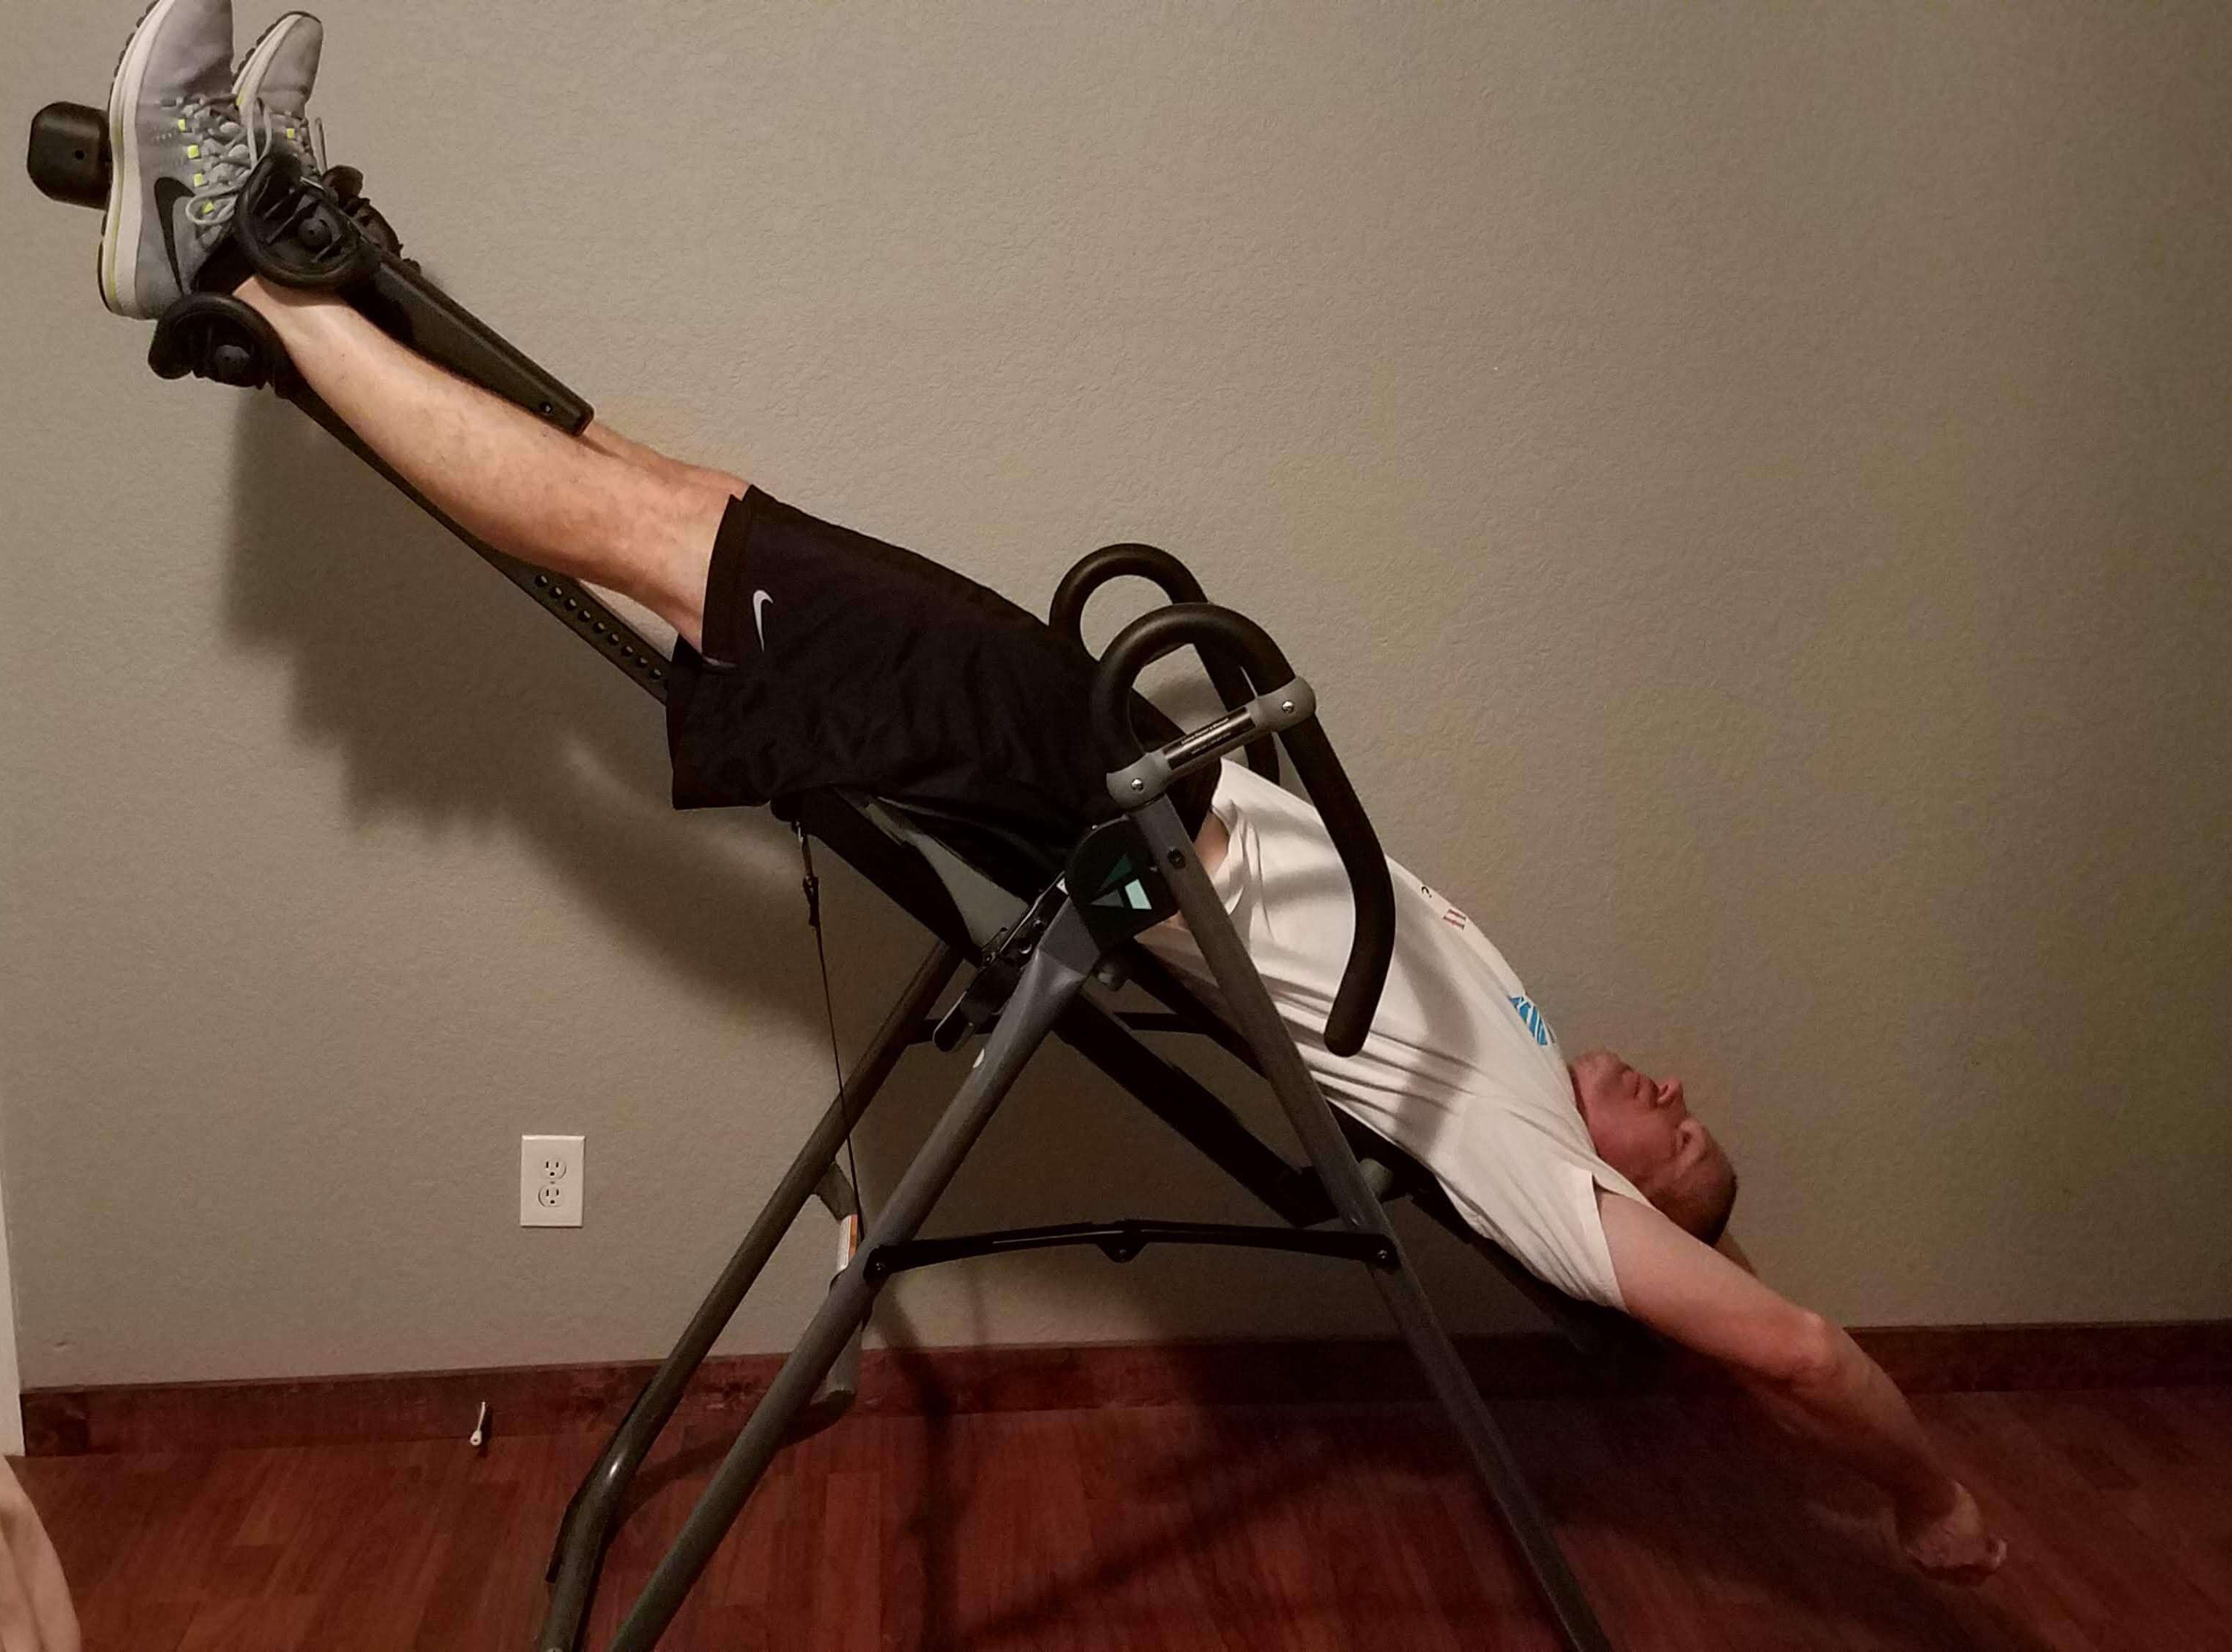 Teeter Inversion Table Reviews